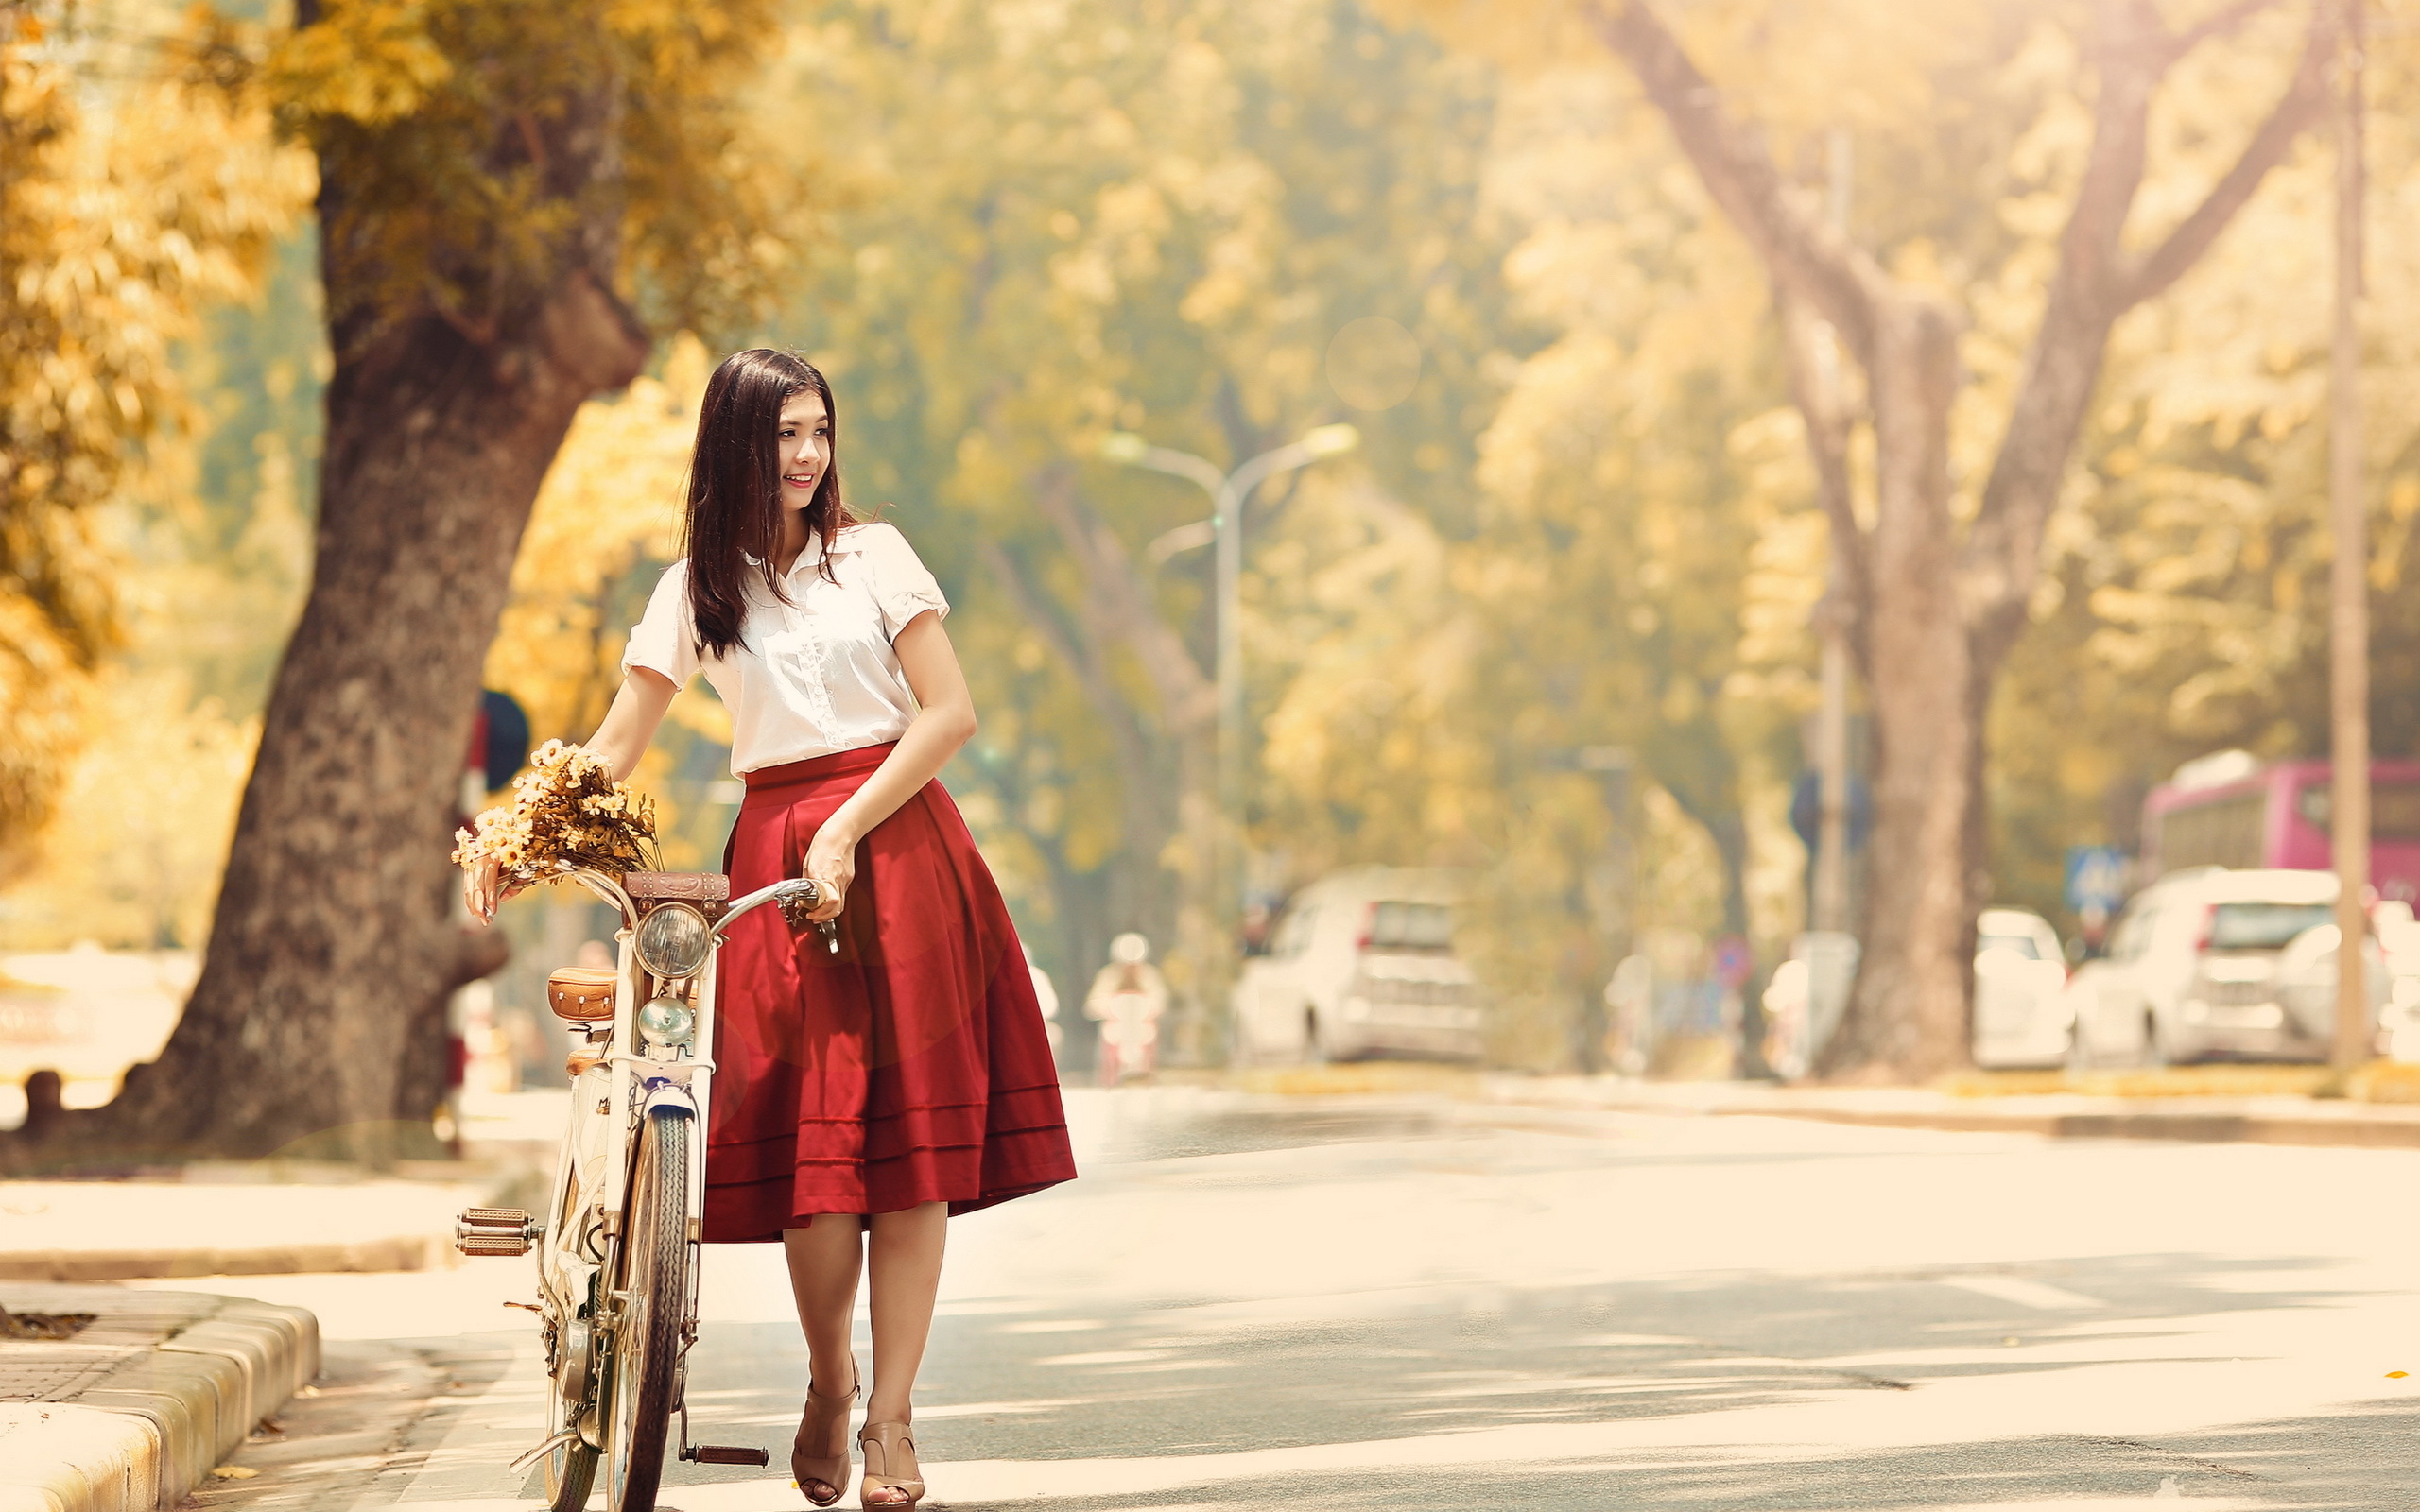 Vintage Bicycle Classic Red Dress Summer Street Autumn Wallpaper Jpg